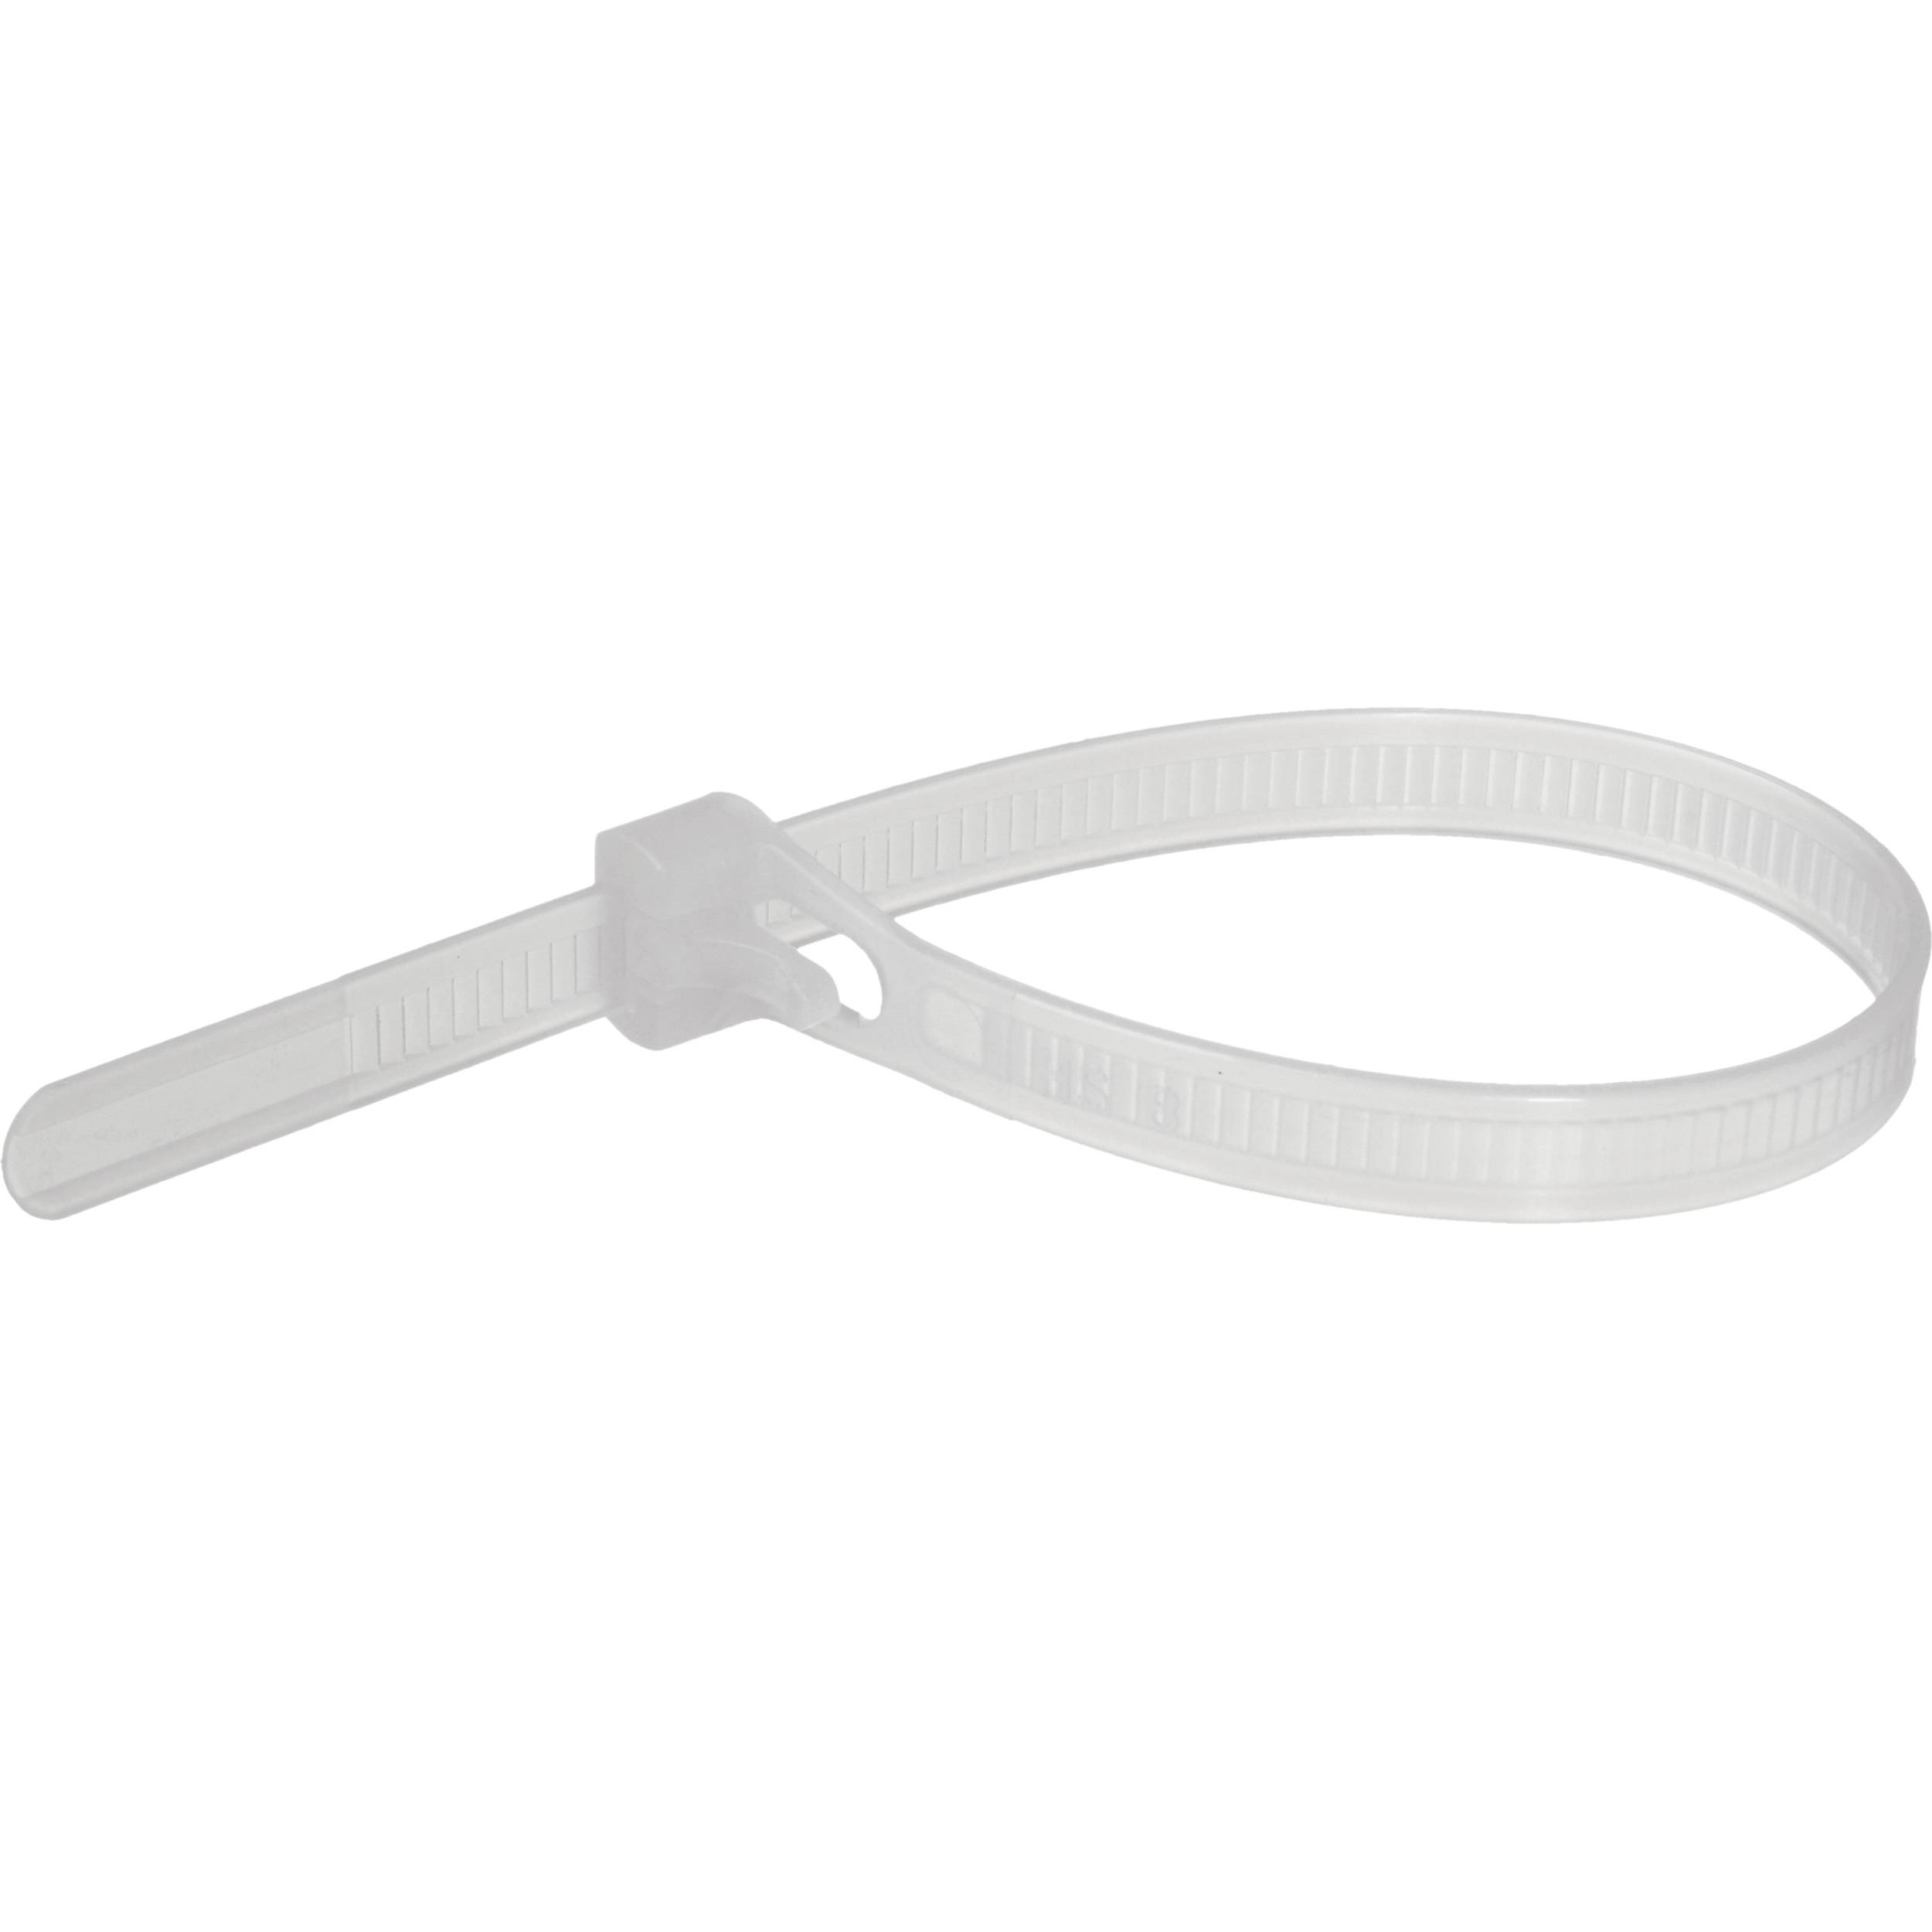 Pearstone 8" Reusable Plastic Cable Ties - Clear (20-Pack)